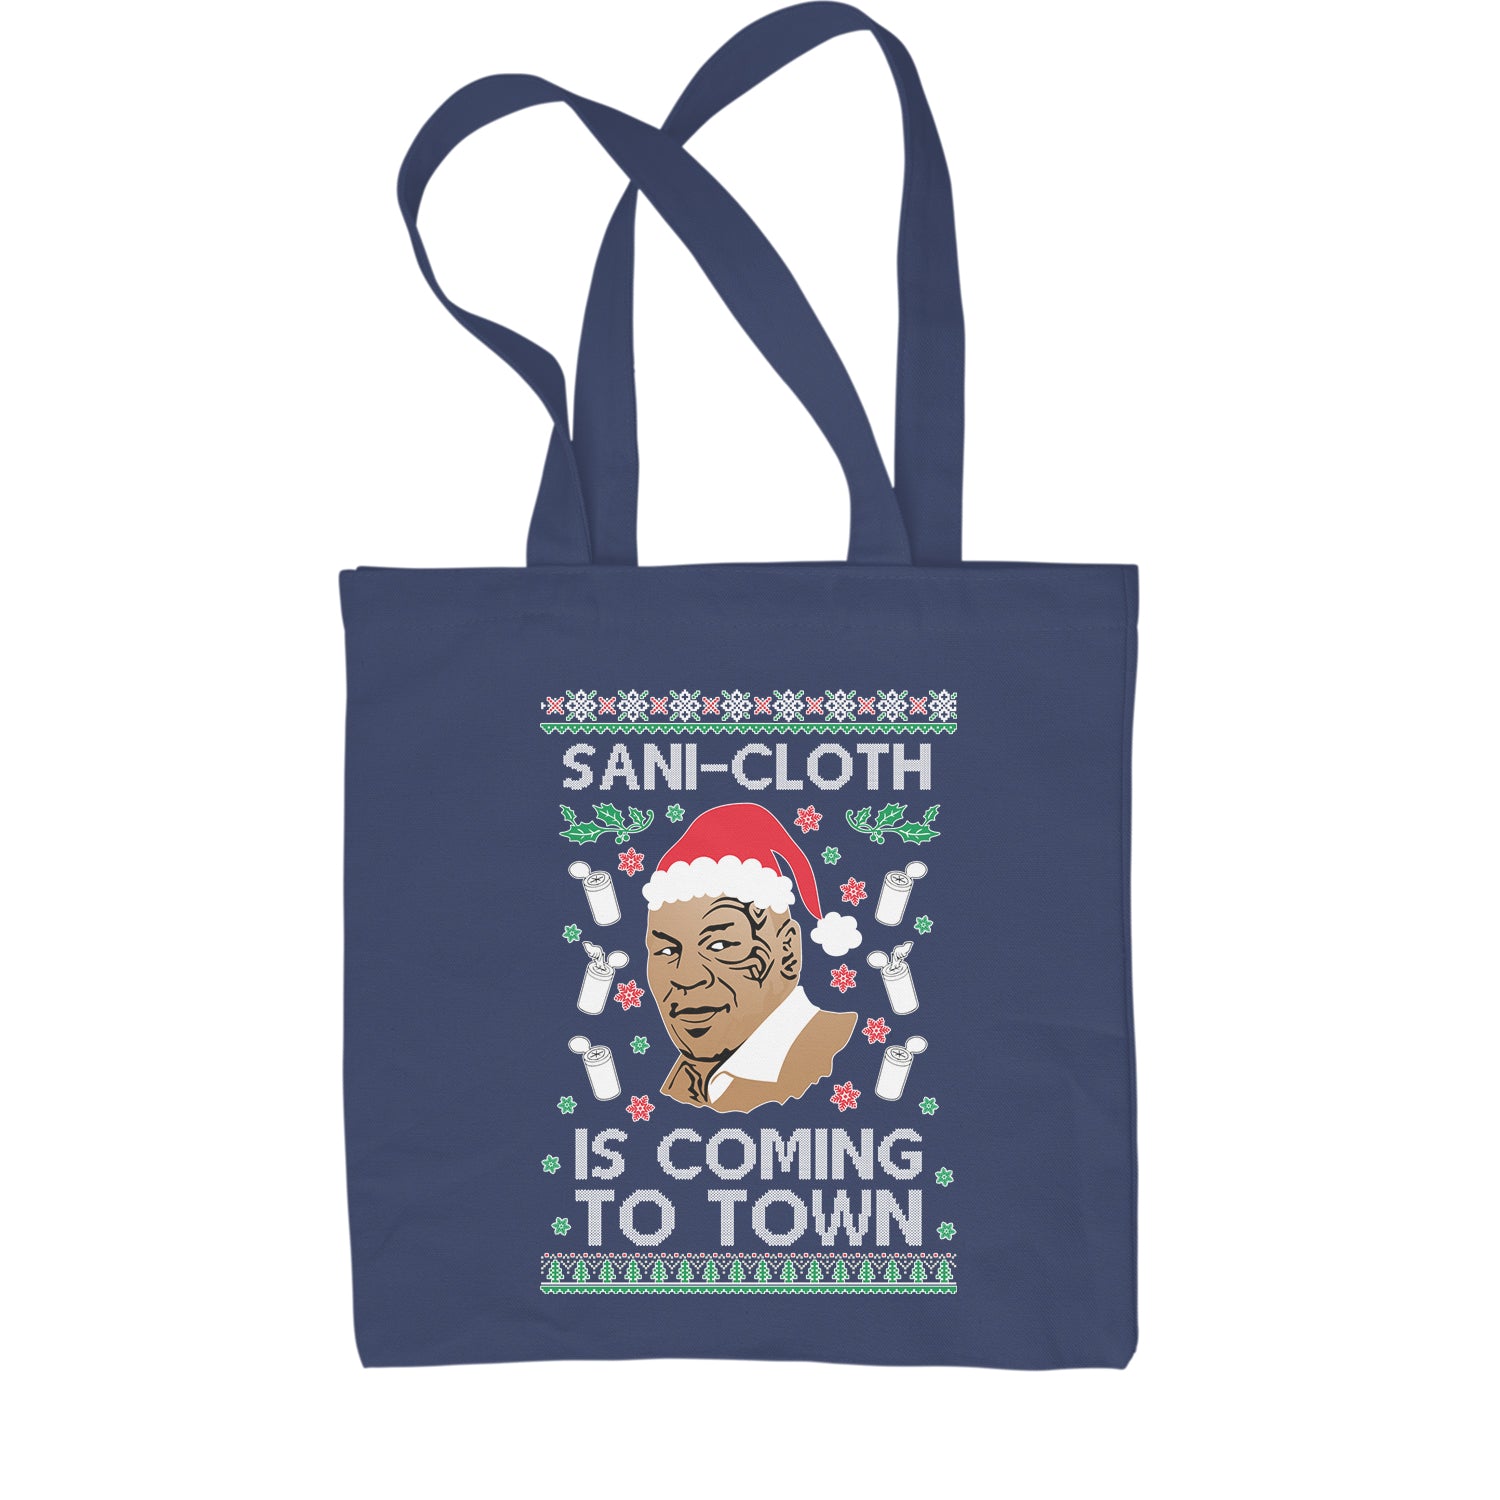 Sani-Cloth Is Coming To Town Ugly Christmas Shopping Tote Bag 2021, mike, miketyson, tyson by Expression Tees